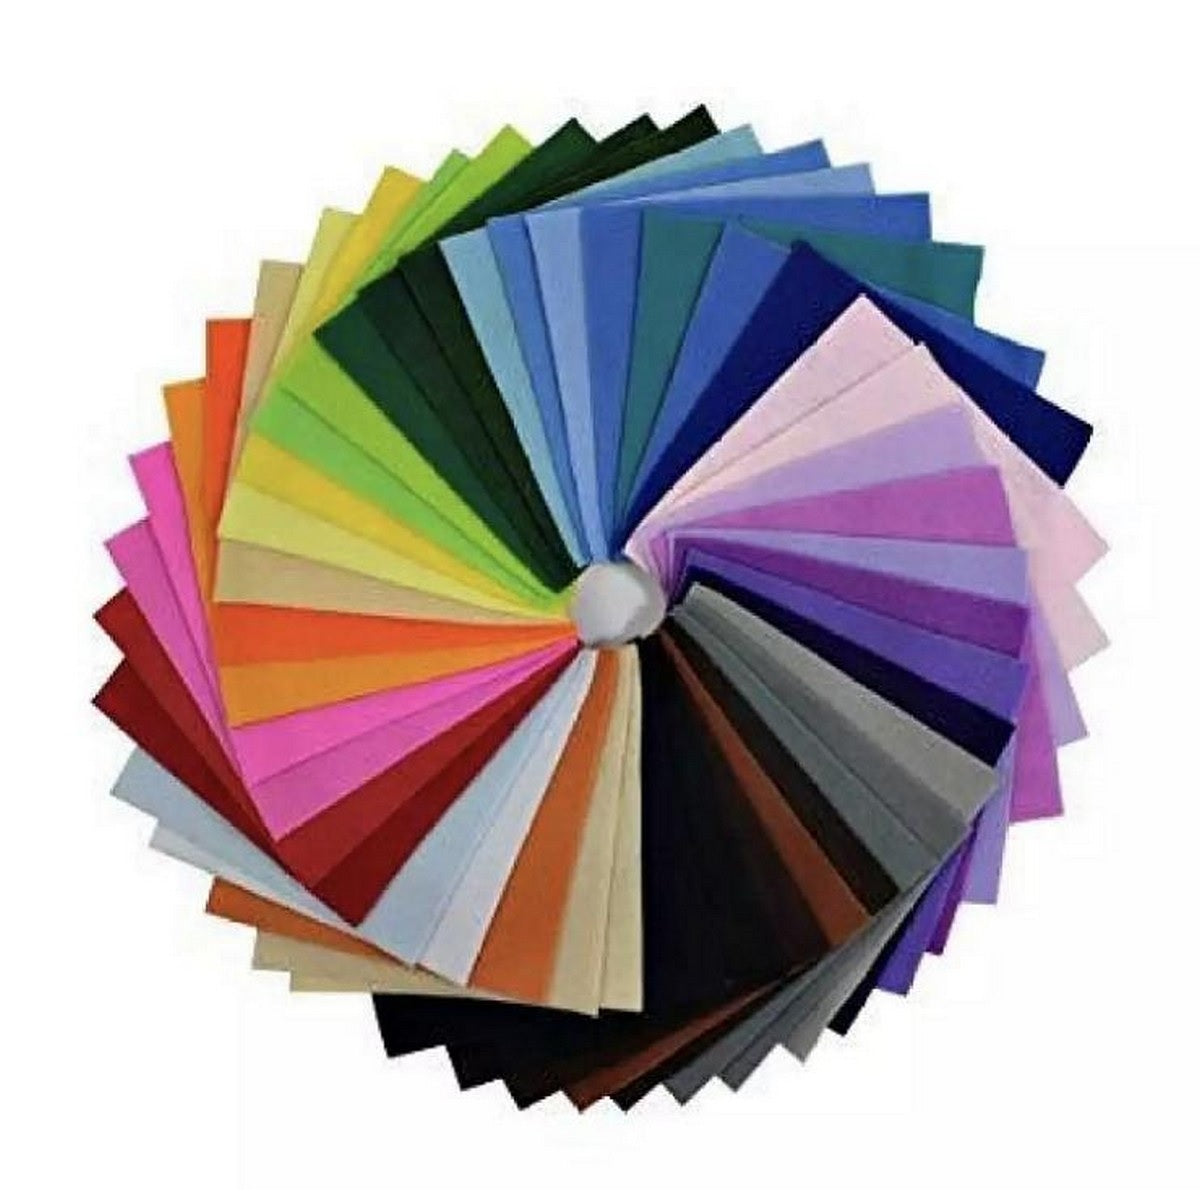 22inch x 28inch 10pcs Felt Fabric Sheet in 10 Different Colors